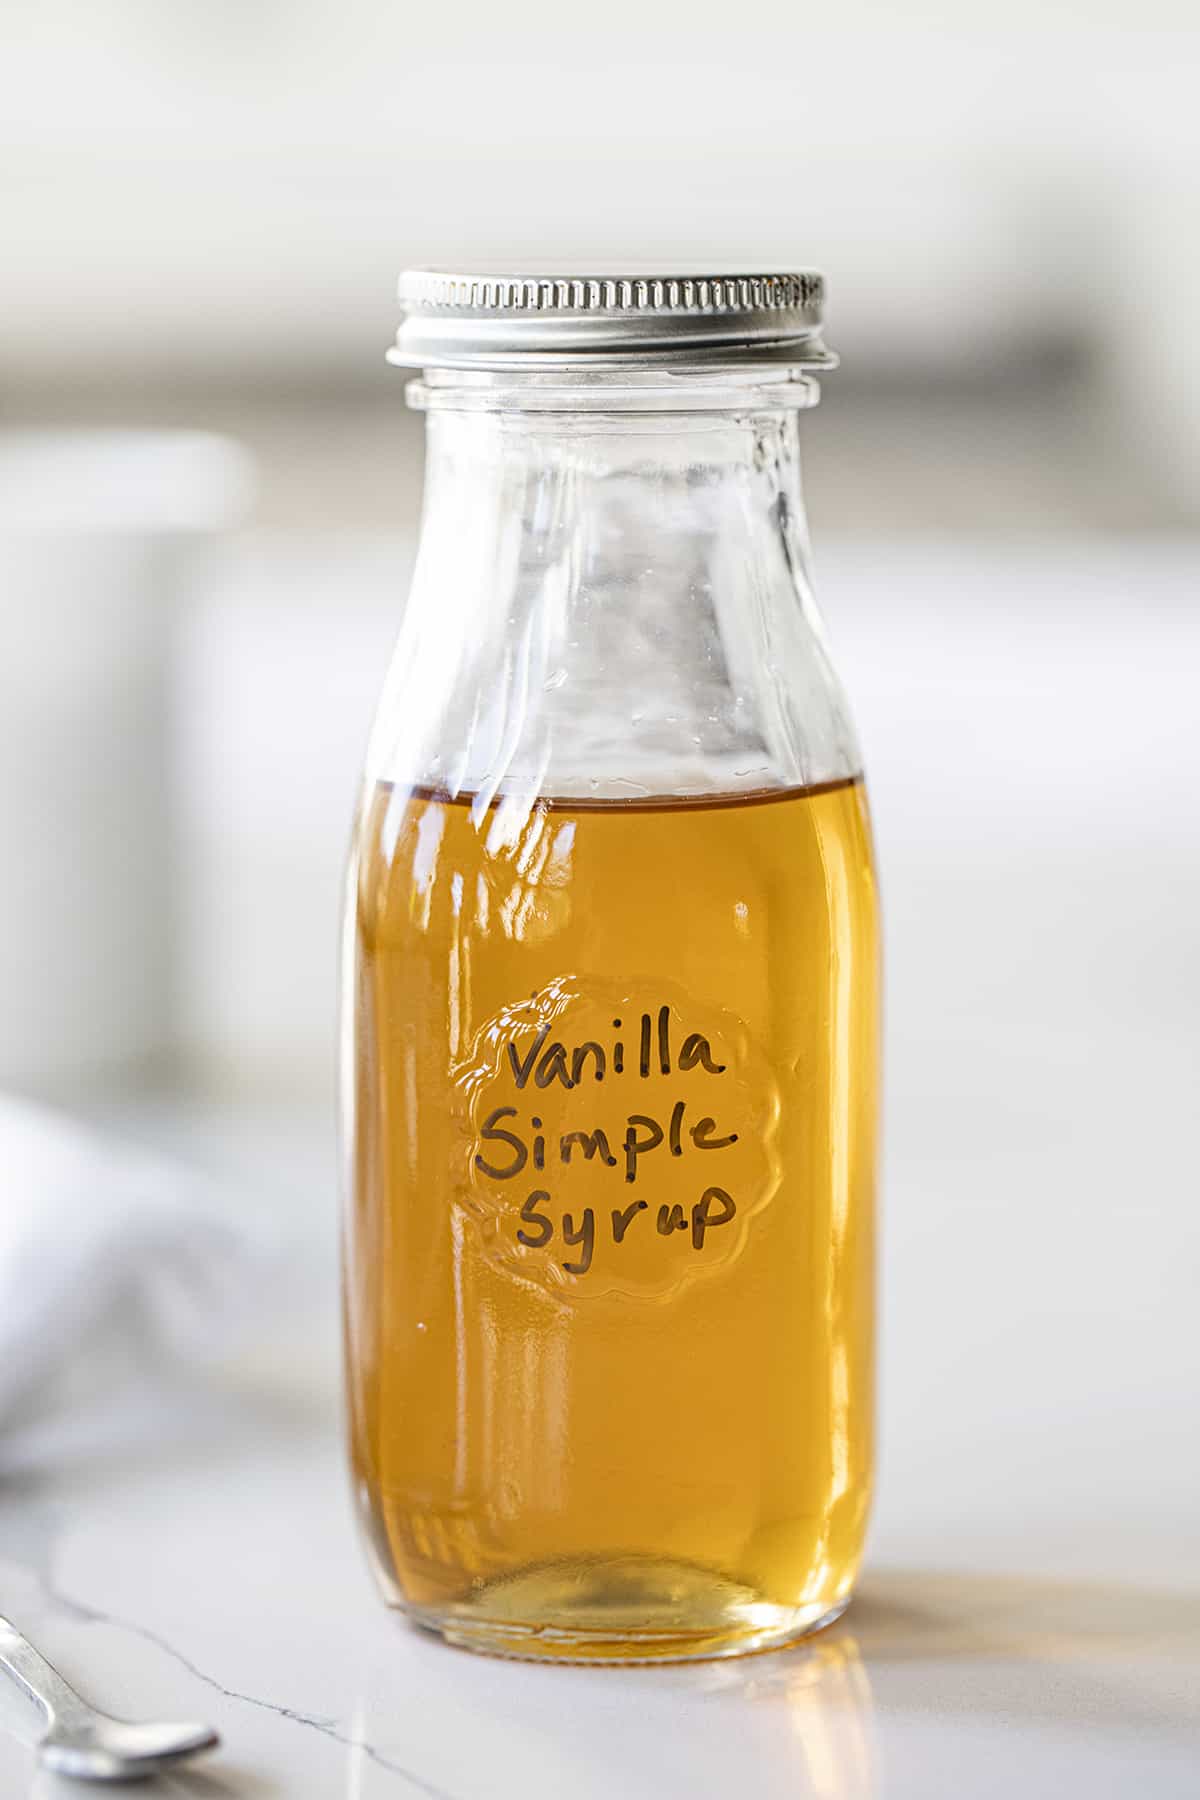 Bottle of Vanilla Simple Syrup on Counter. Simple Syrup, How to Make Simple Syrup, Vanilla Simple Syrup, How to Use Simple Syrup, Cocktail Syrup, drinks, beverages, recipes, iambaker, i am baker.